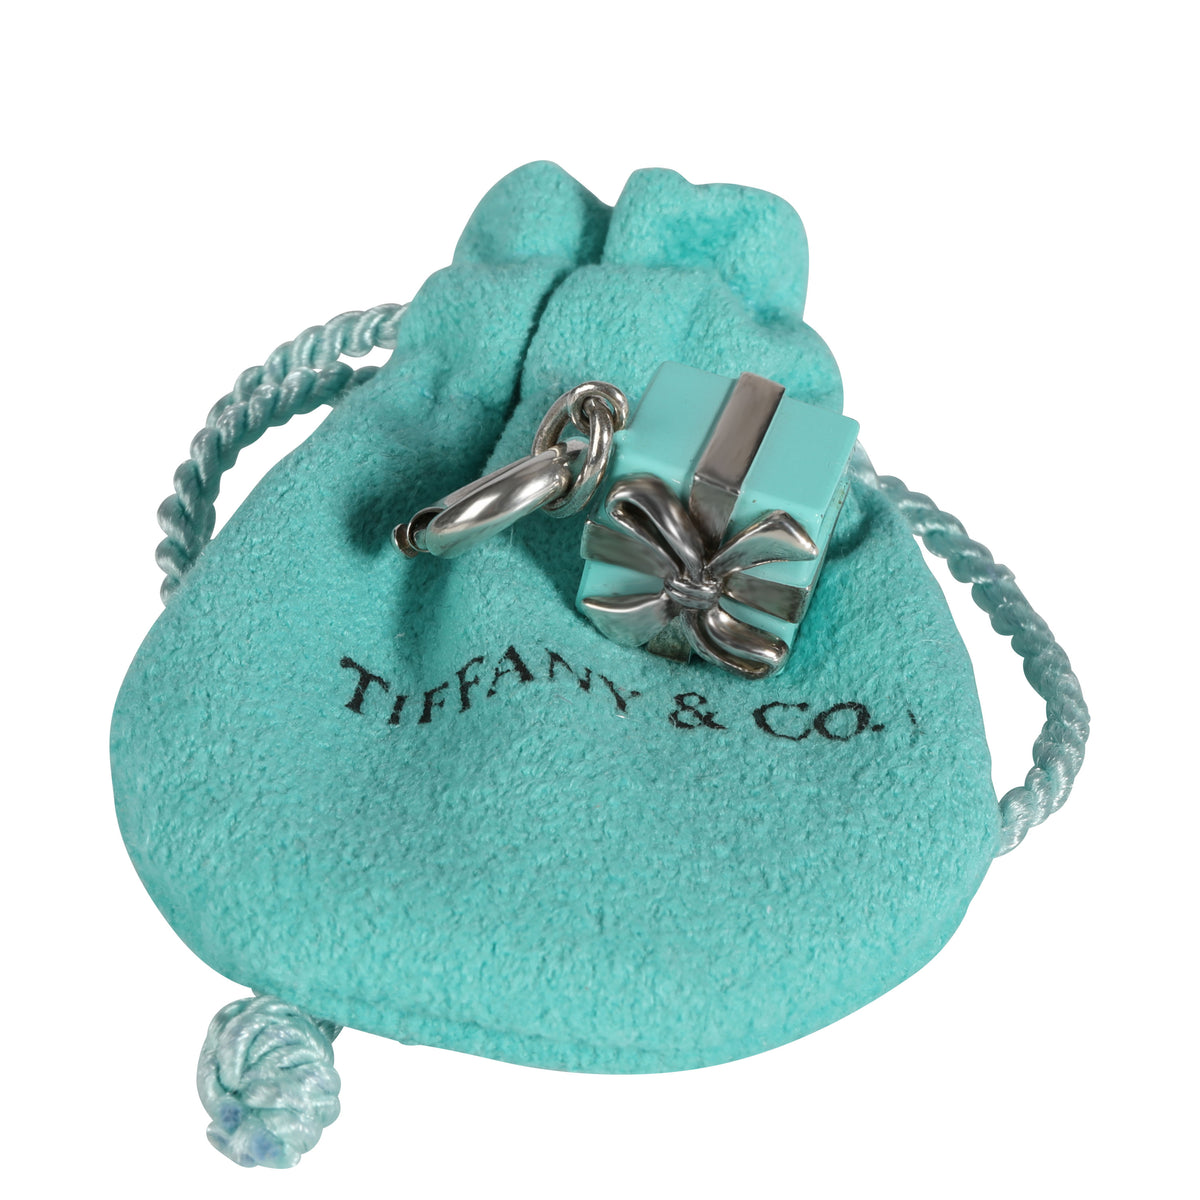 Tiffany & Co. Blue Box Charm in Sterling Silver